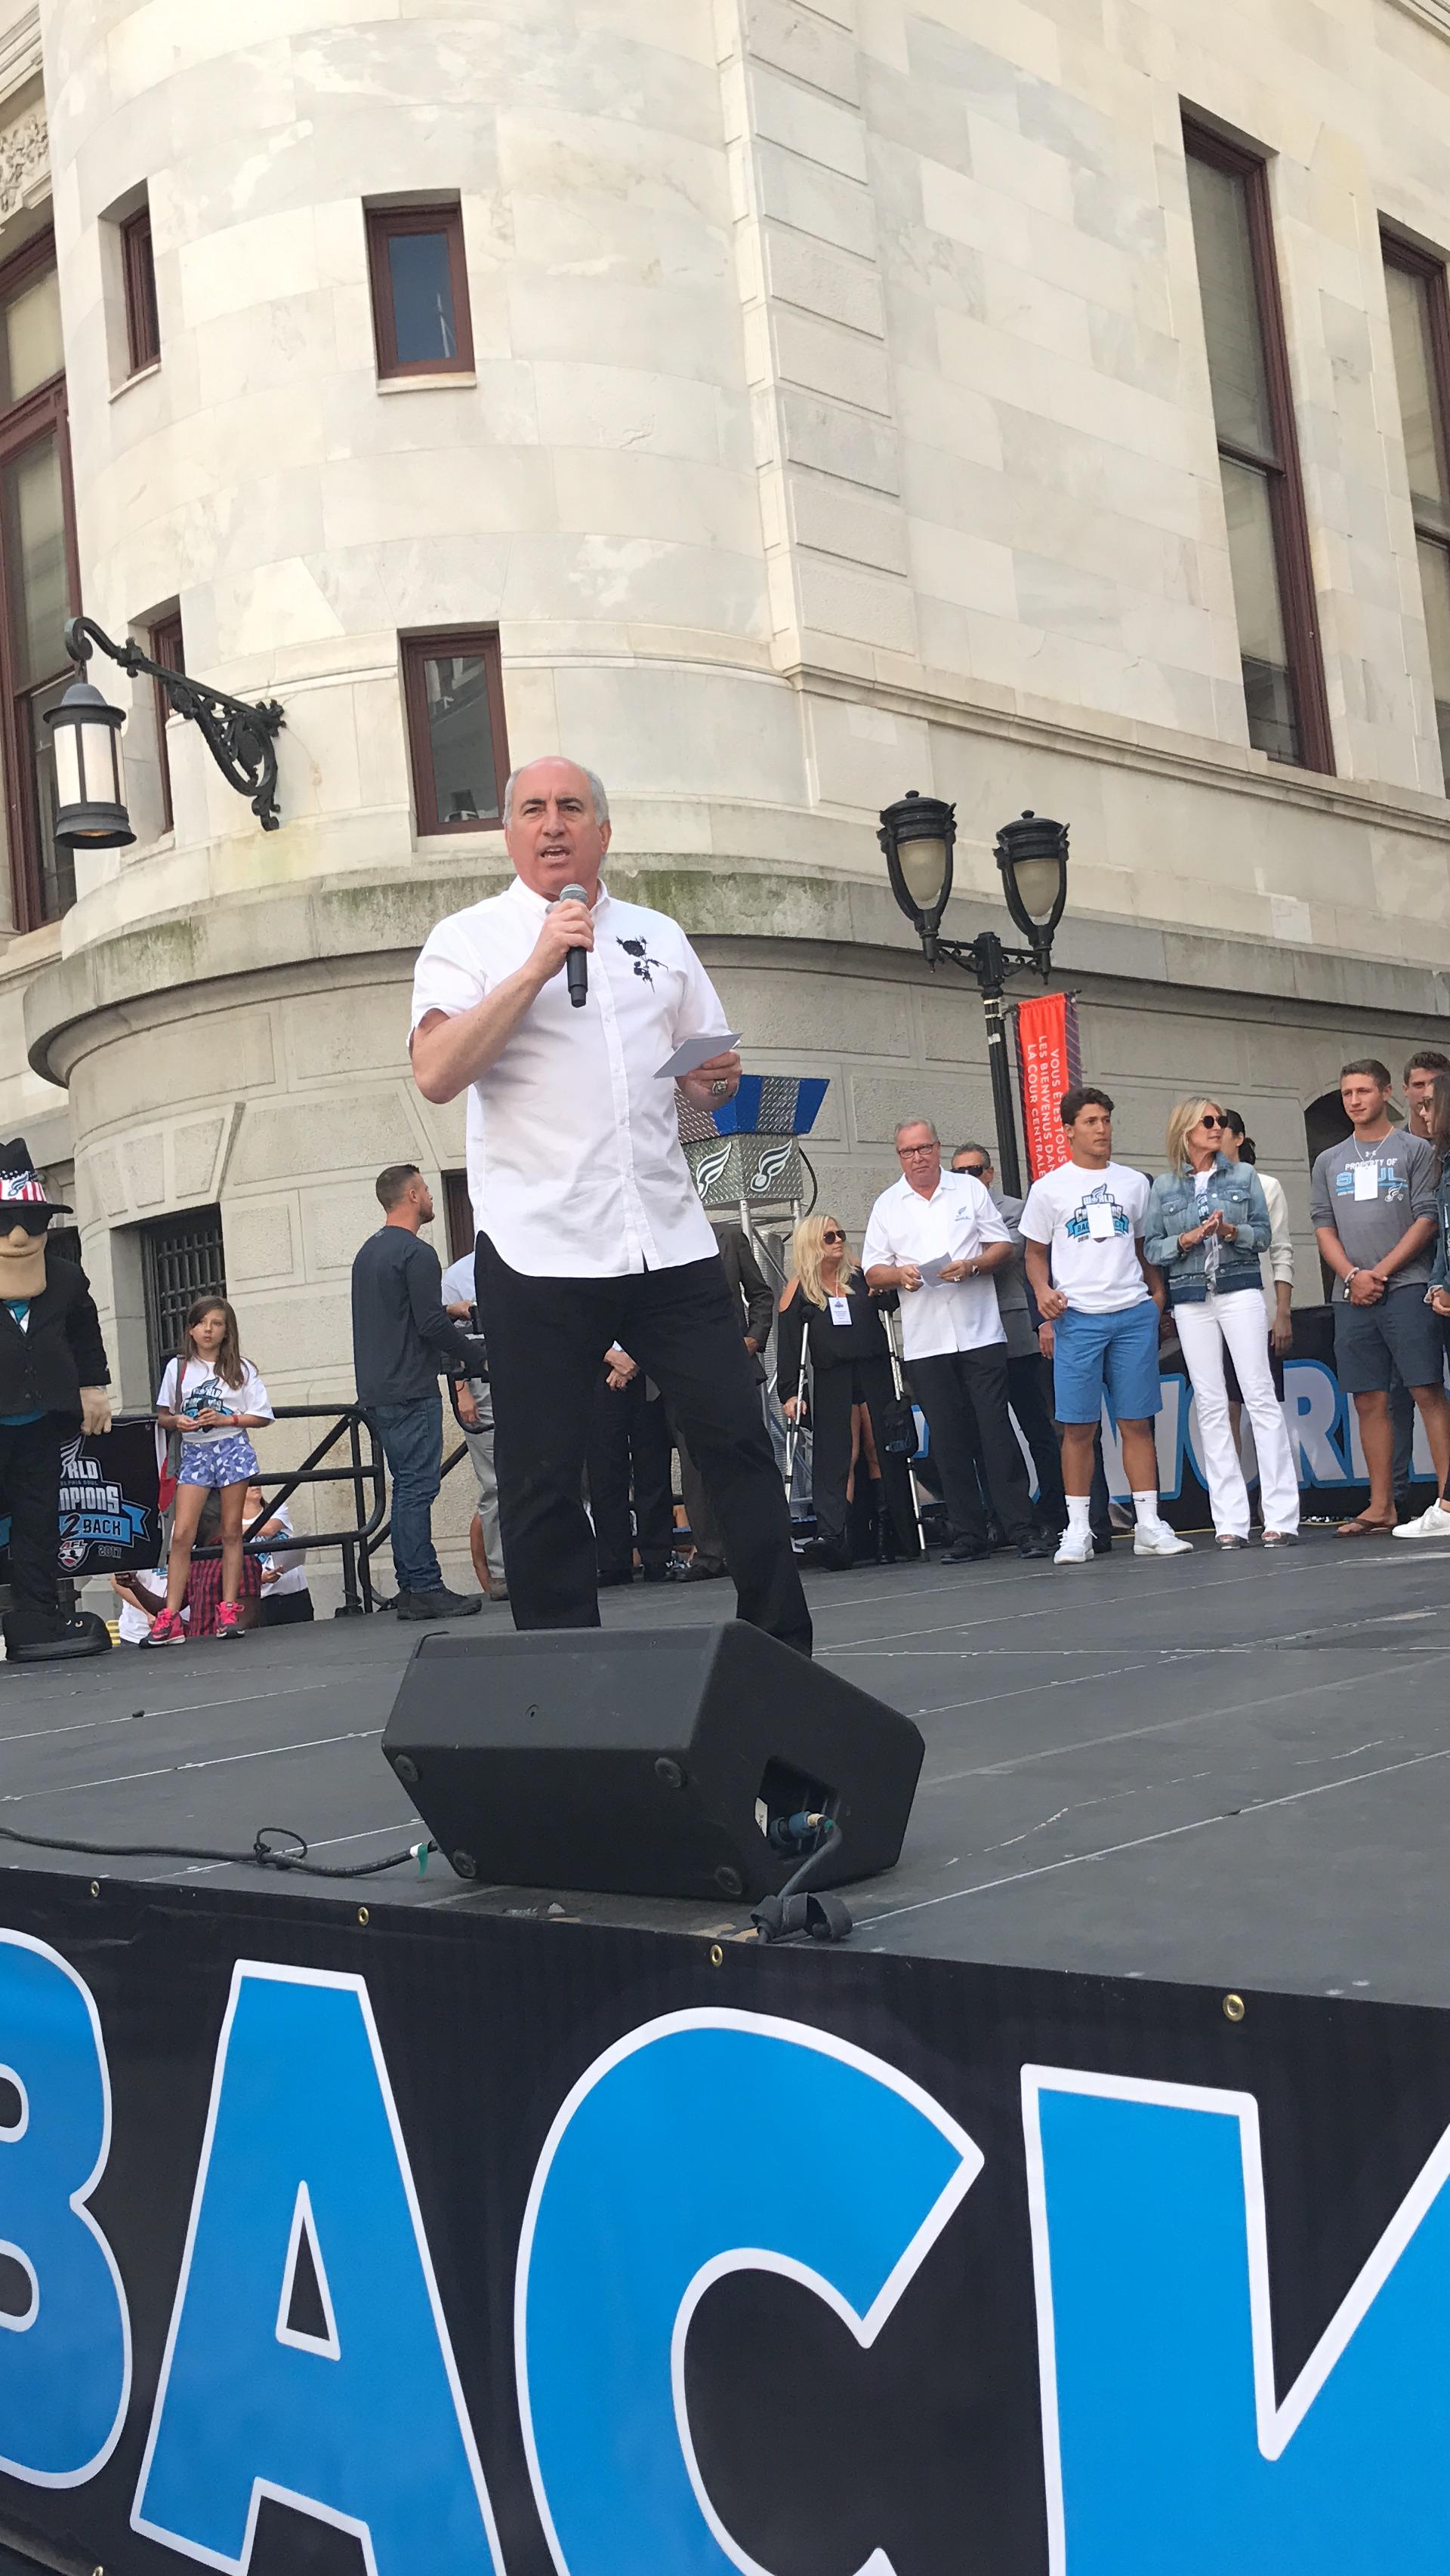 Speech at the 2017 ArenaBowl Championship Rally